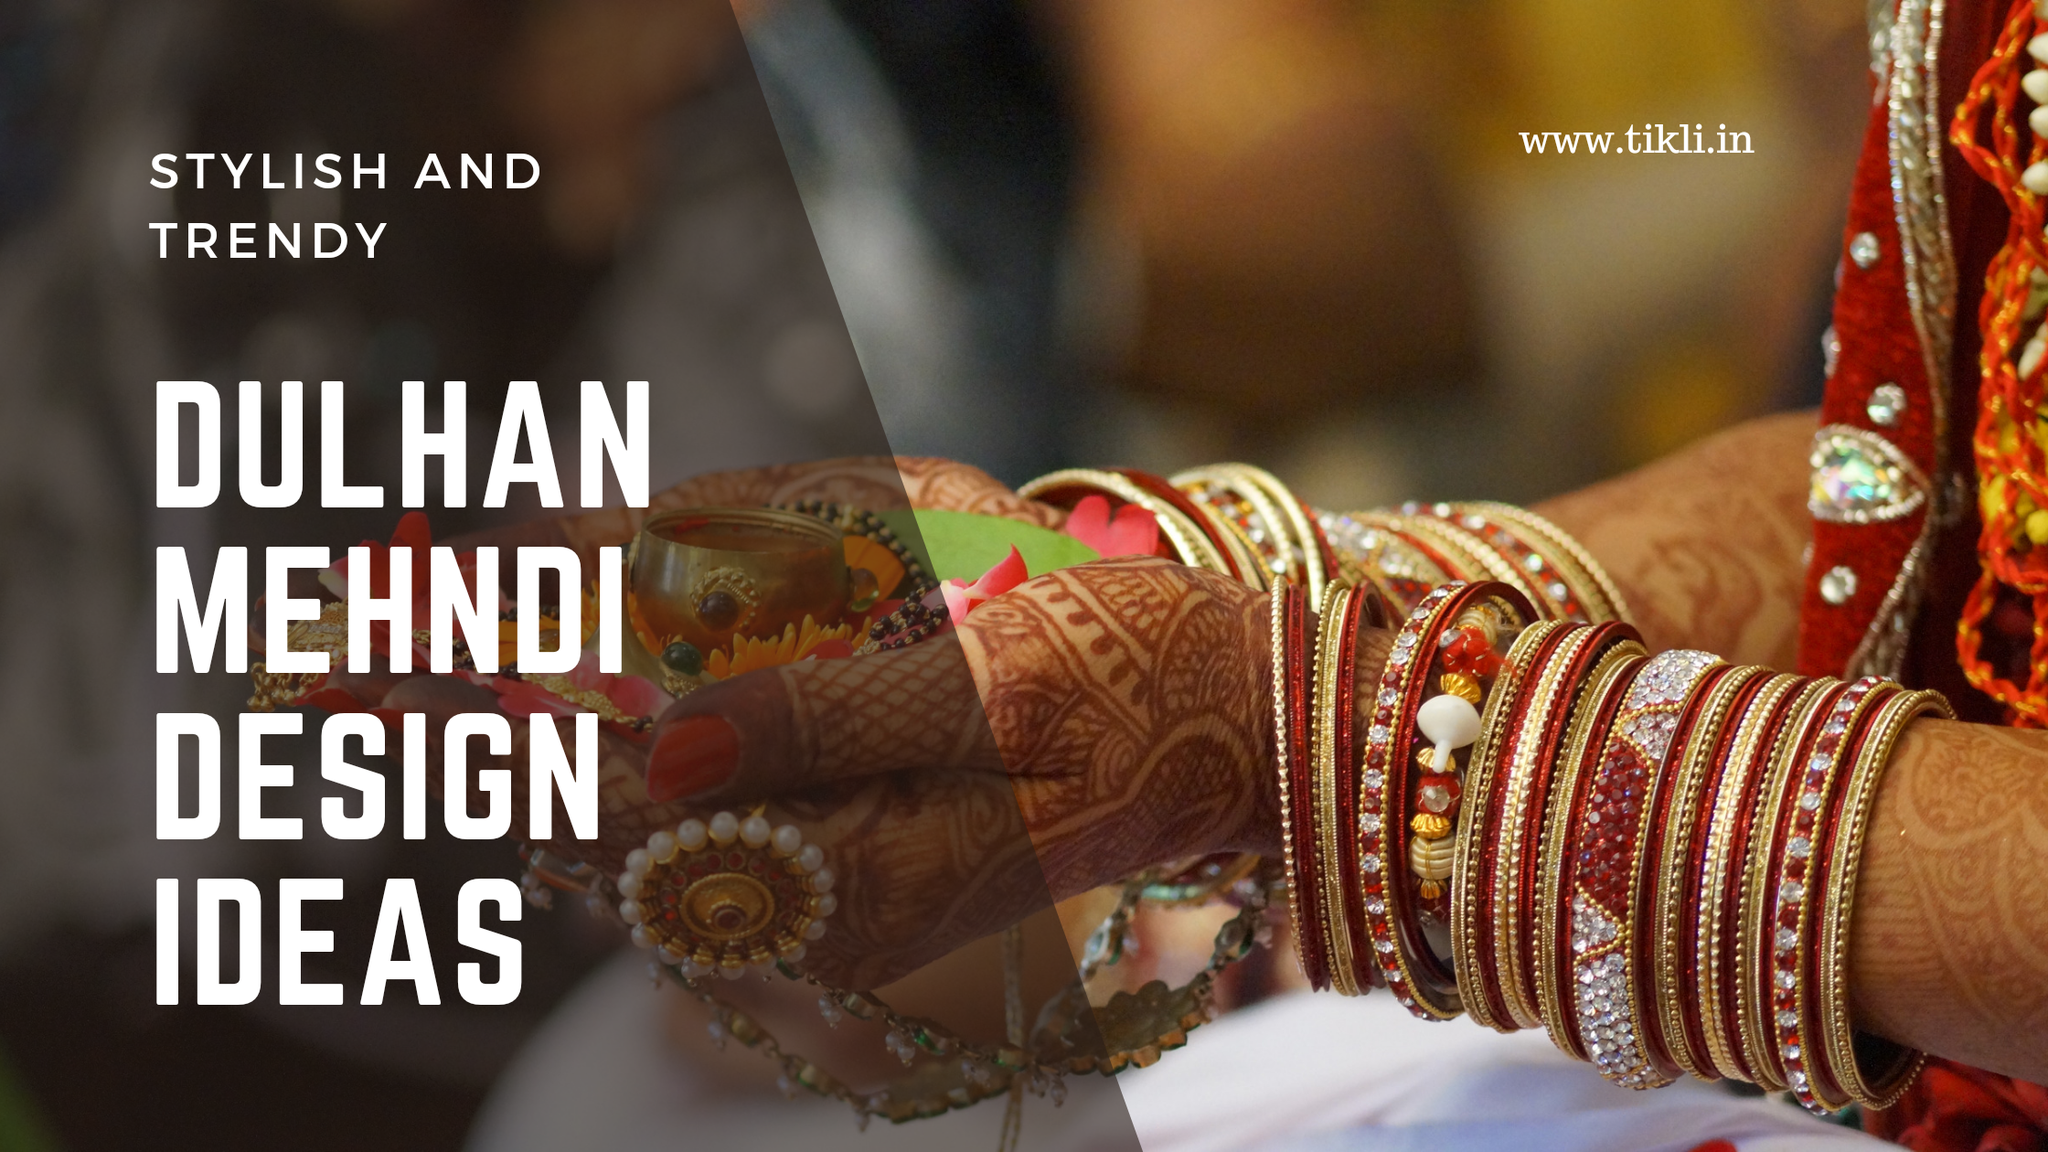 25+ Traditional and Modern Dulhan Mehndi Design Ideas - Trends in 2021